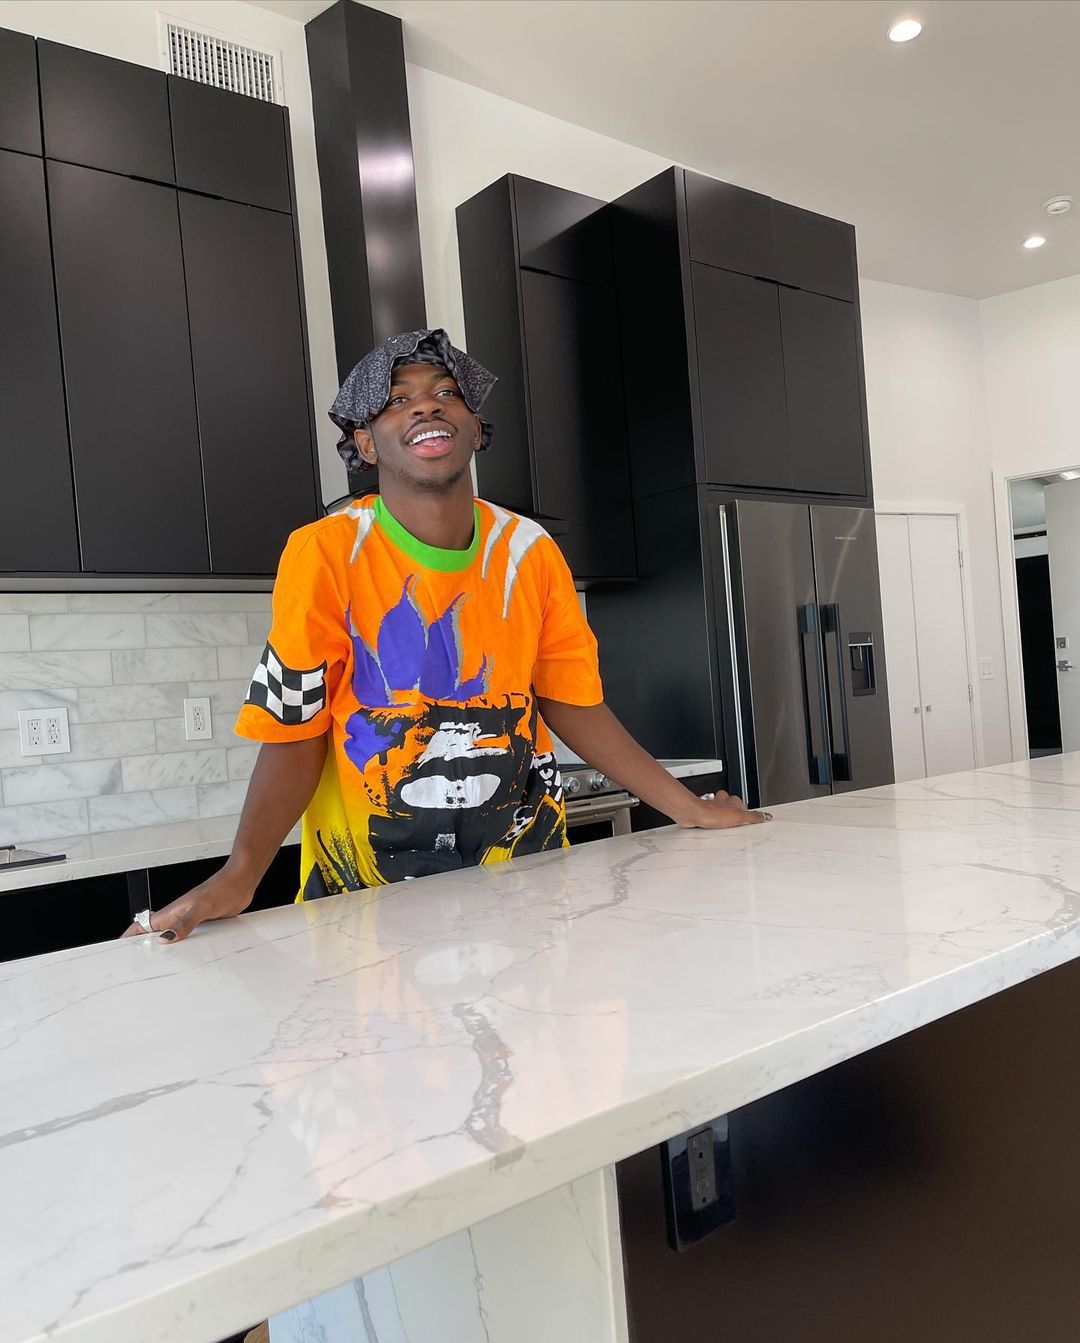 Lil Nas X buys a new home 3/5/21